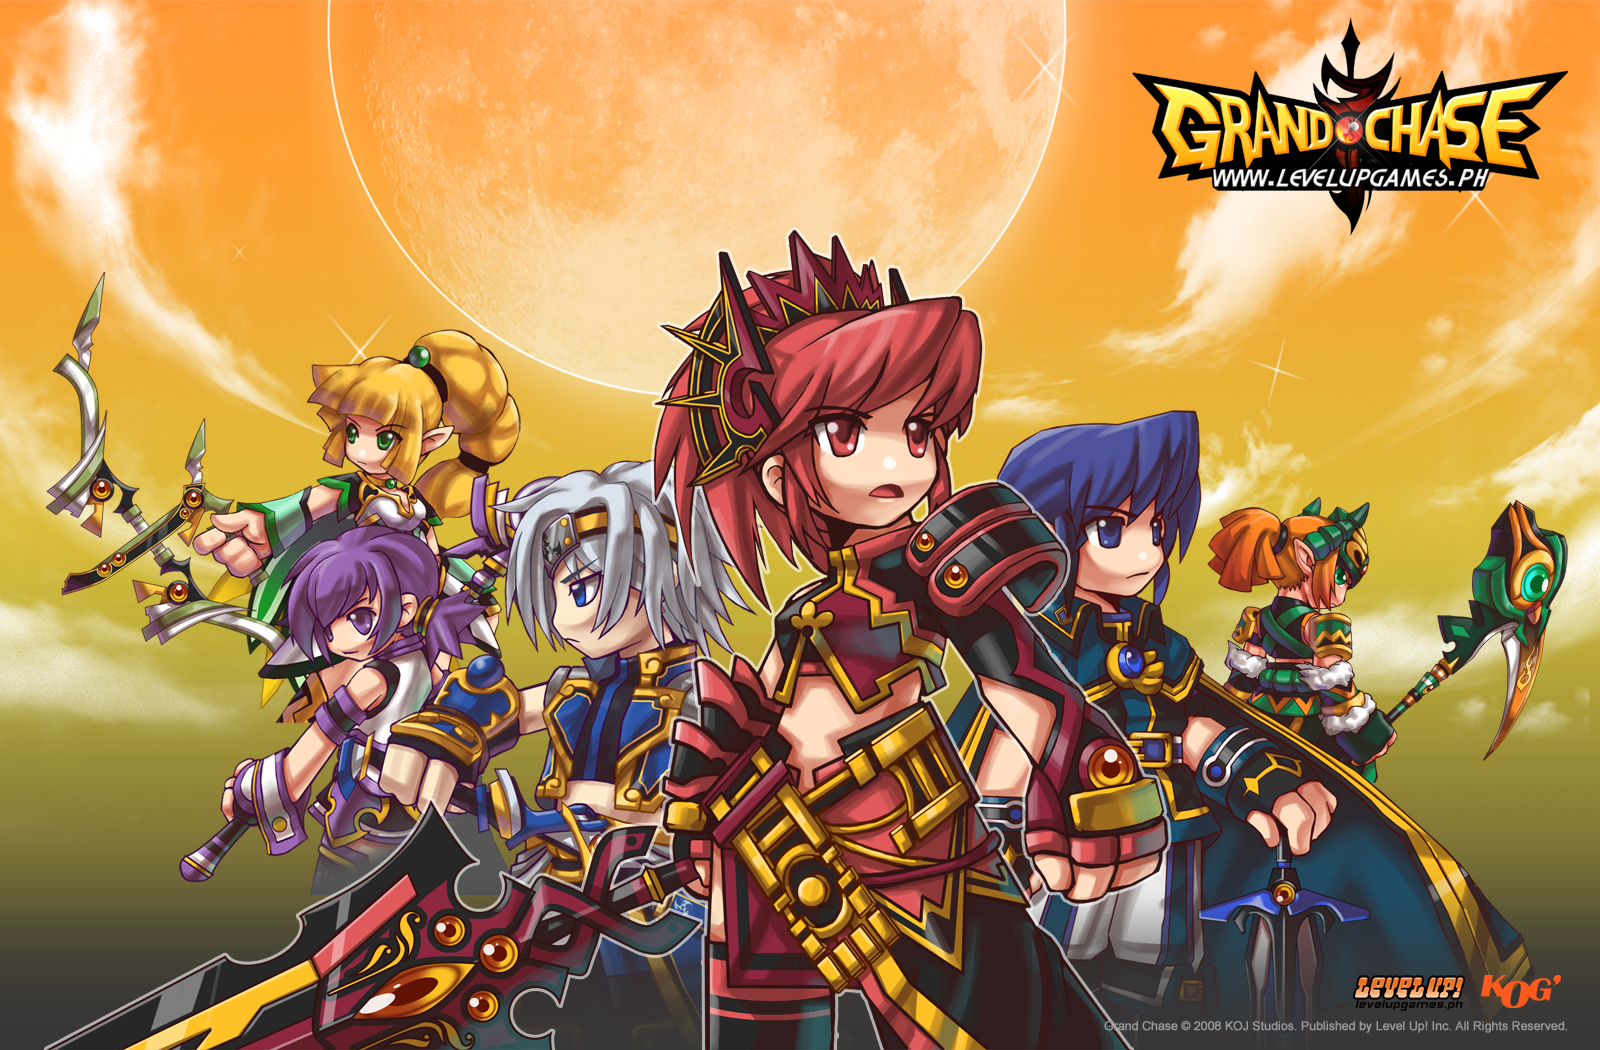 Grand Chase HD wallpapers, Desktop wallpaper - most viewed